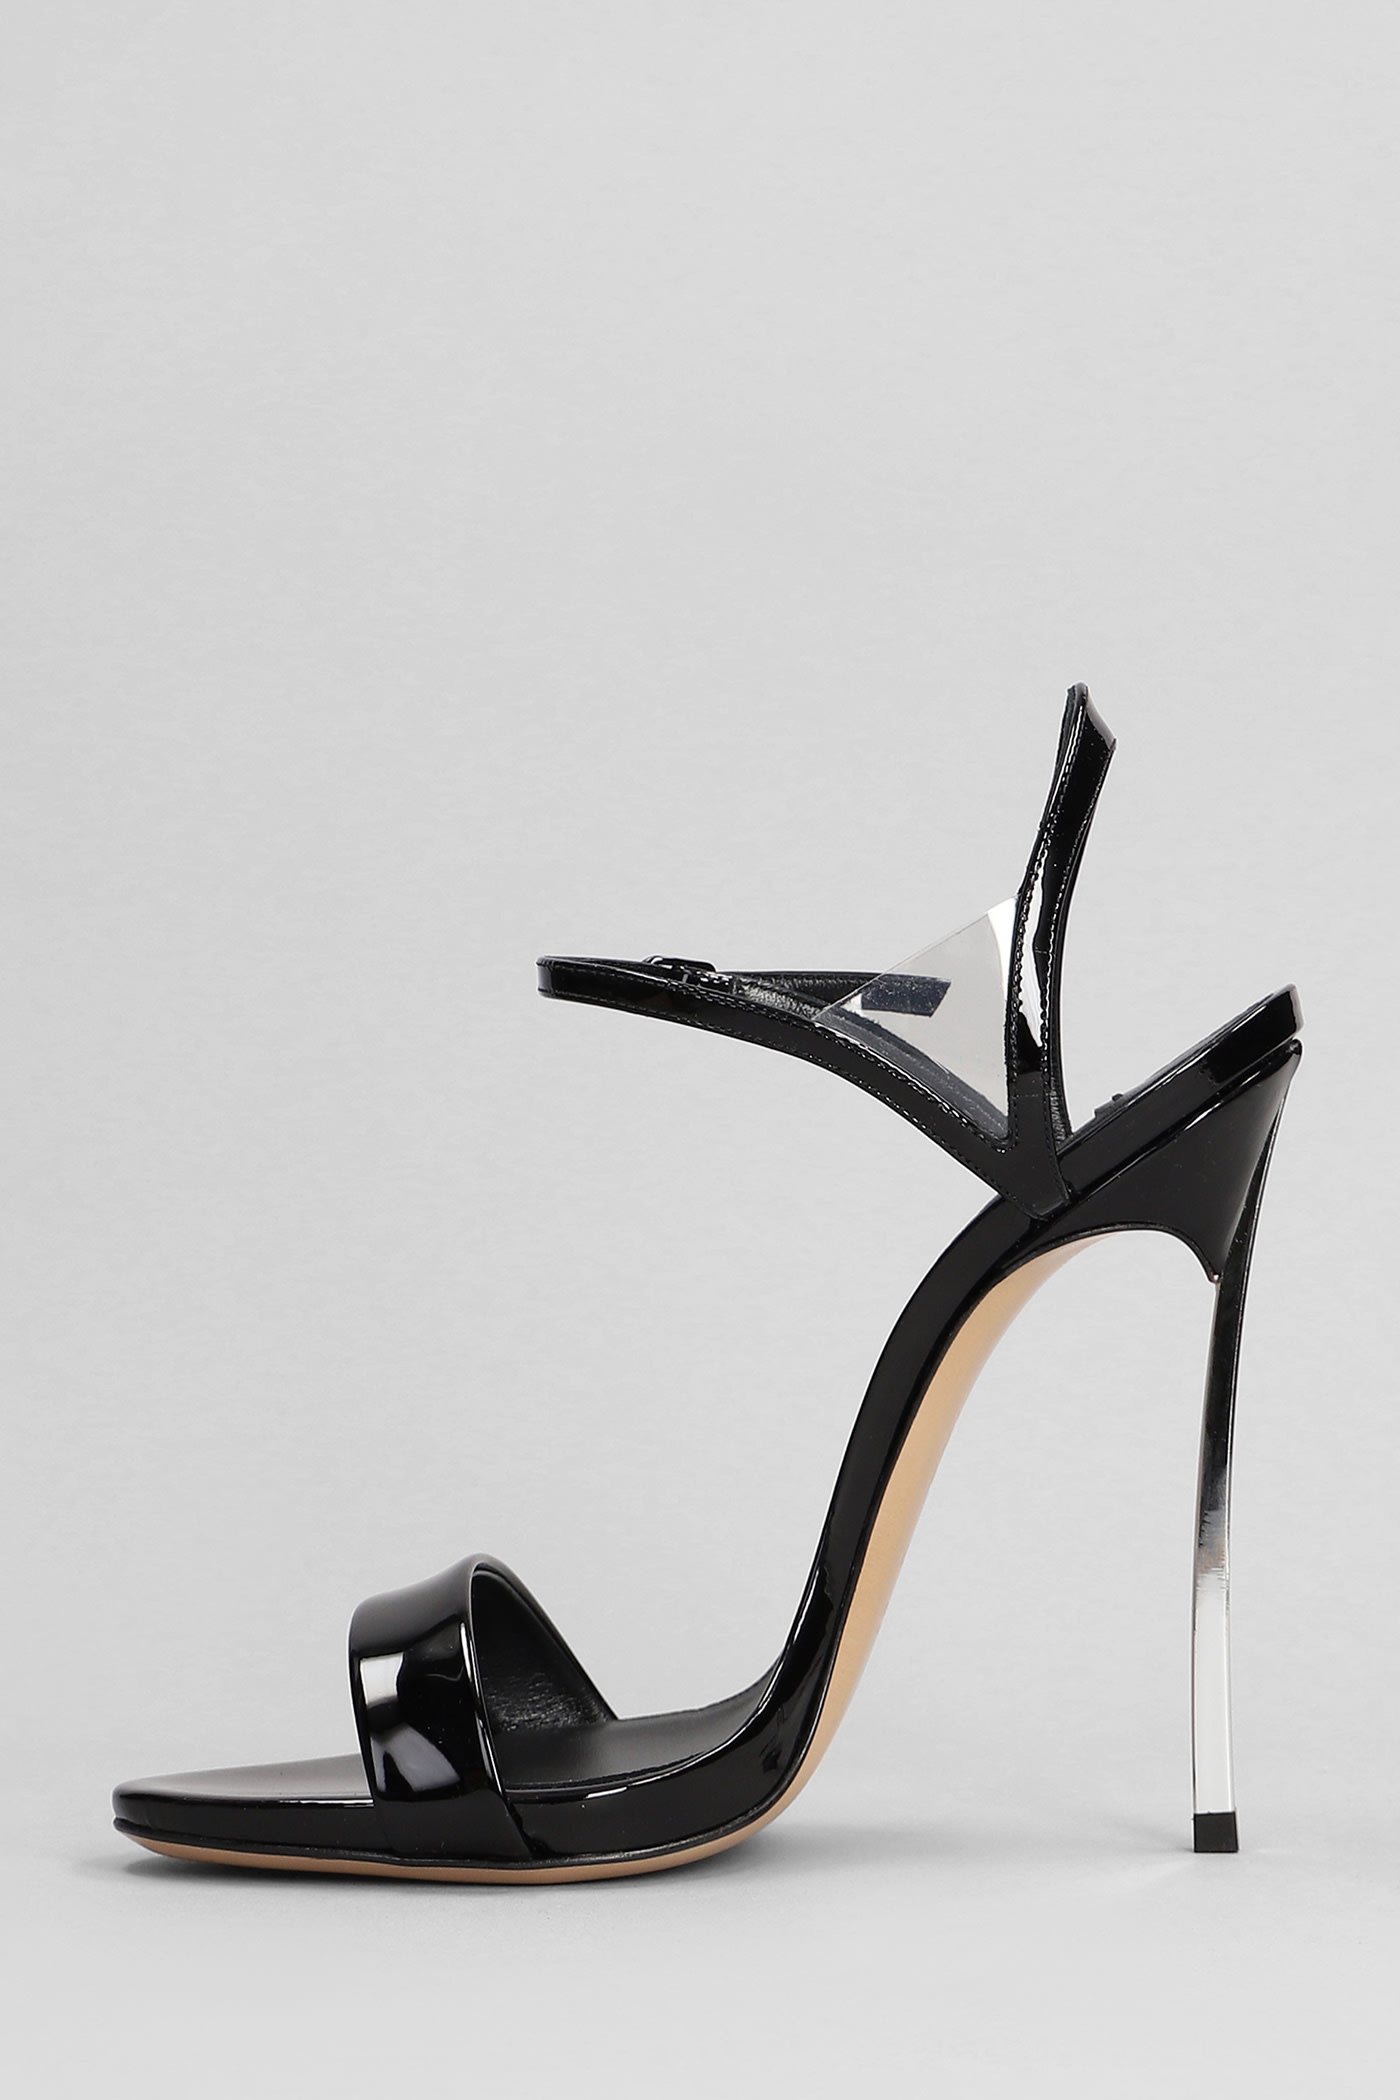 Shop Casadei Blade Sandals In Black Patent Leather